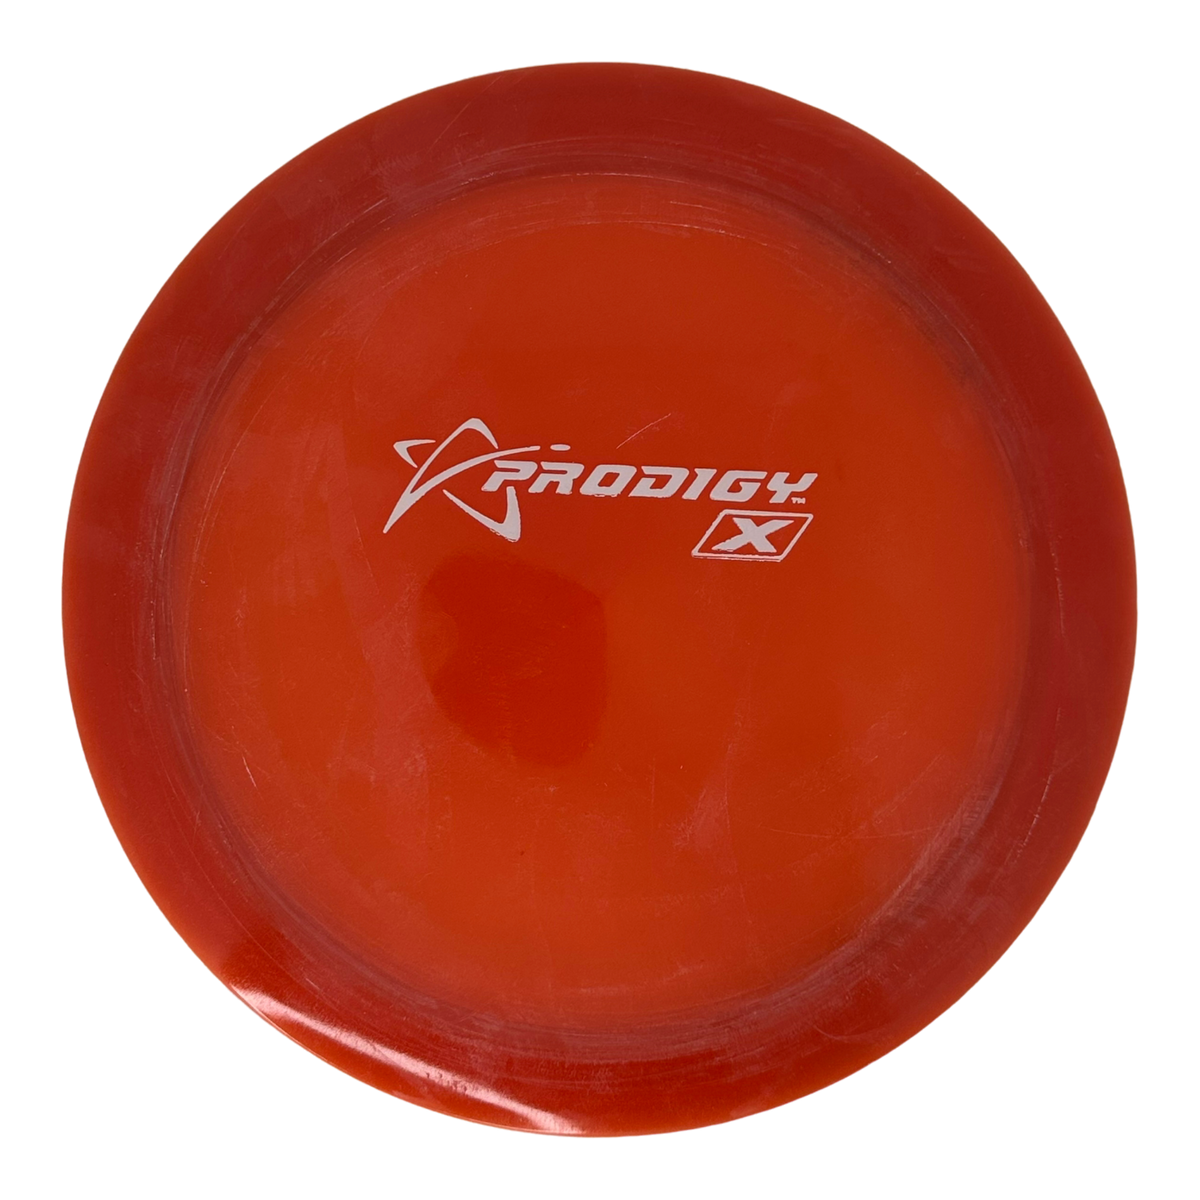 Prodigy Air X2 - X-Outs